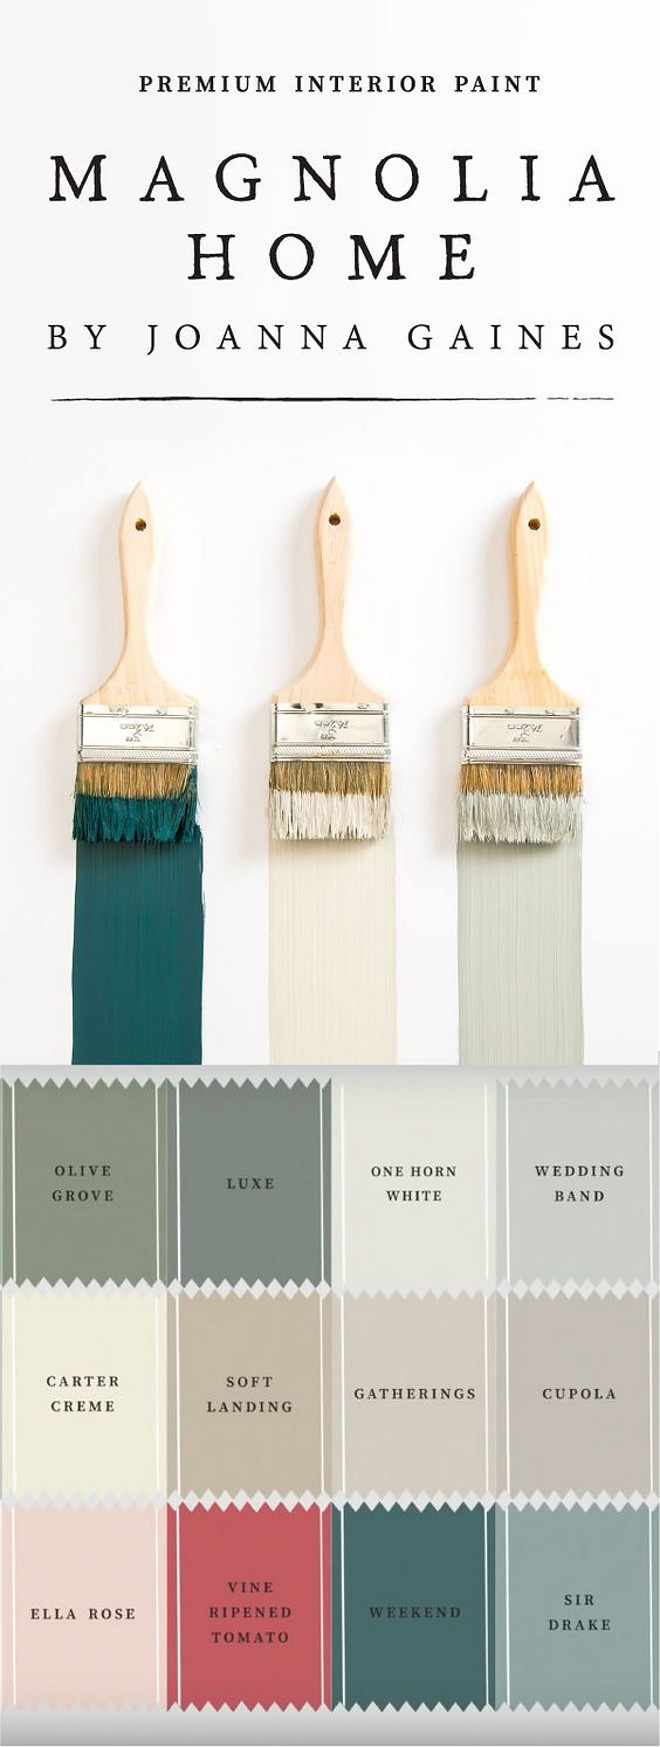 Joanna Gaines Magnolia Home Paint collection. Fixer Upper Joanna Gaines Magnolia Home Paint collection. Joanna Gaines Magnolia Home Paint collection. Fixer Upper Joanna Gaines Magnolia Home Paint collection #JoannaGaines #MagnoliaHome #Paintcollection #FixerUpper #JoannaGainesPaint #MagnoliaHomePaint